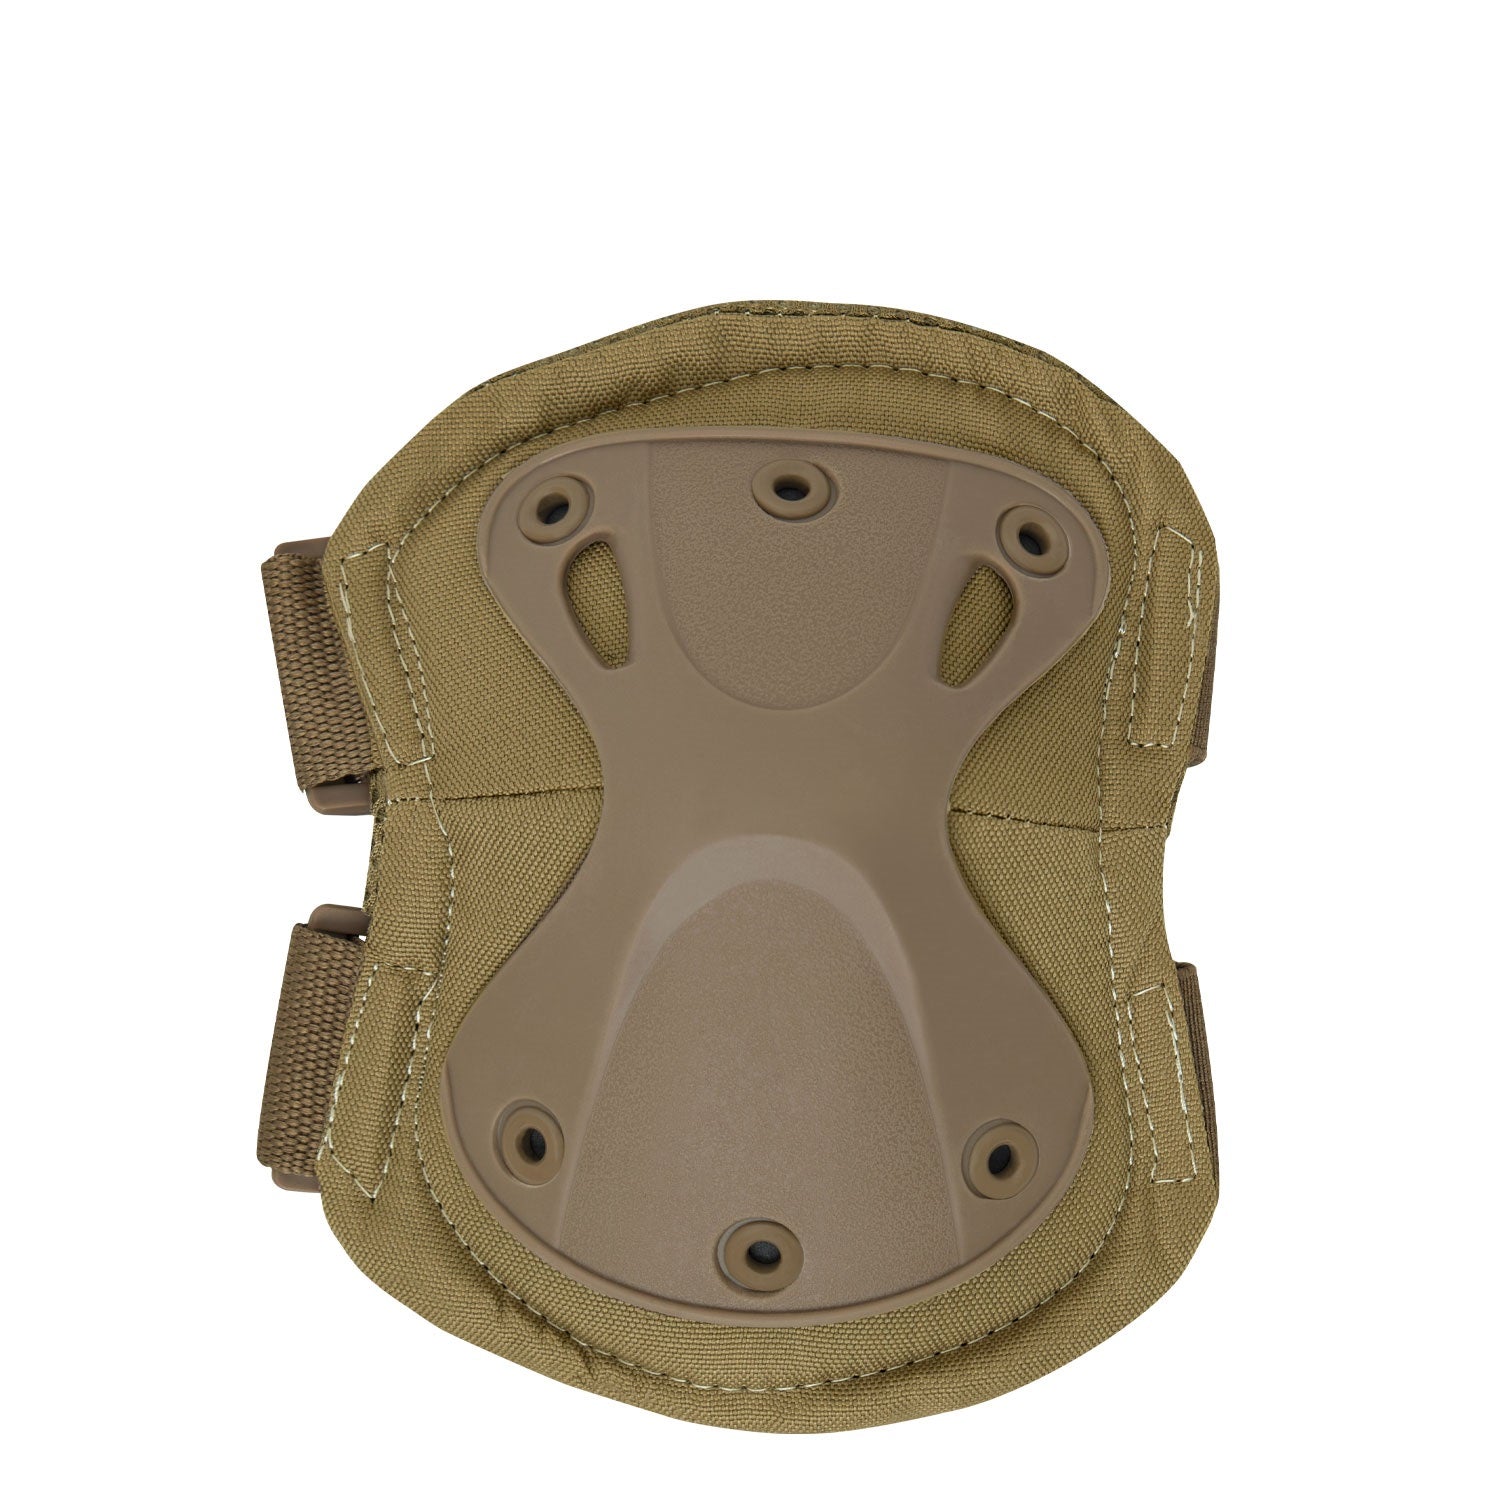 Rothco Low Profile Tactical Elbow Pads Coyote Brown